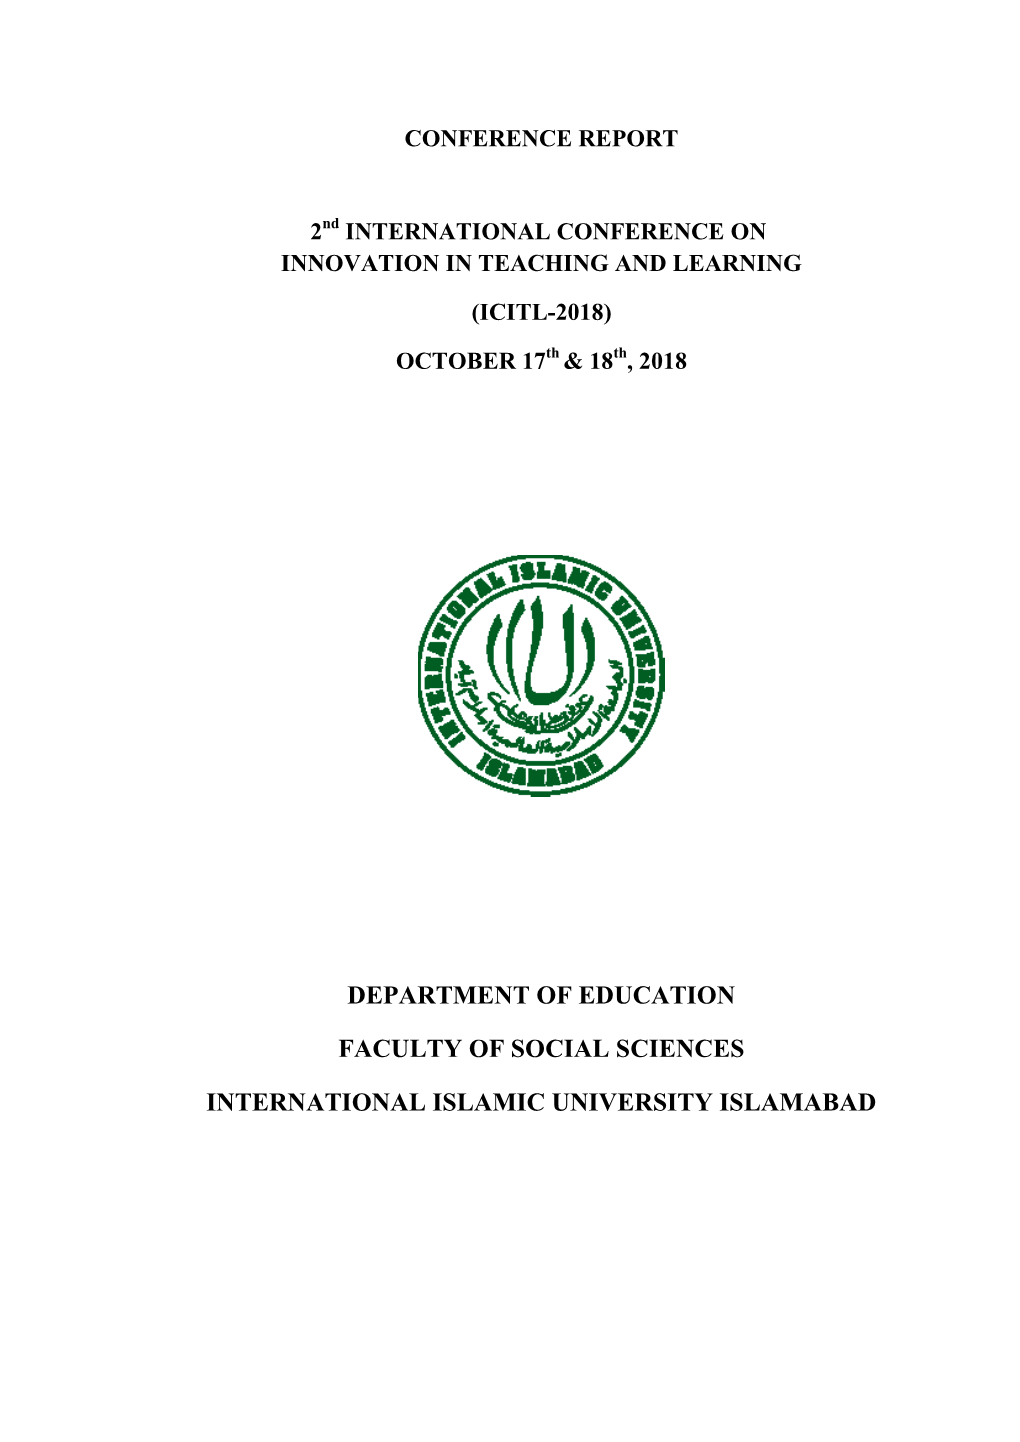 Department of Education Faculty of Social Sciences International Islamic